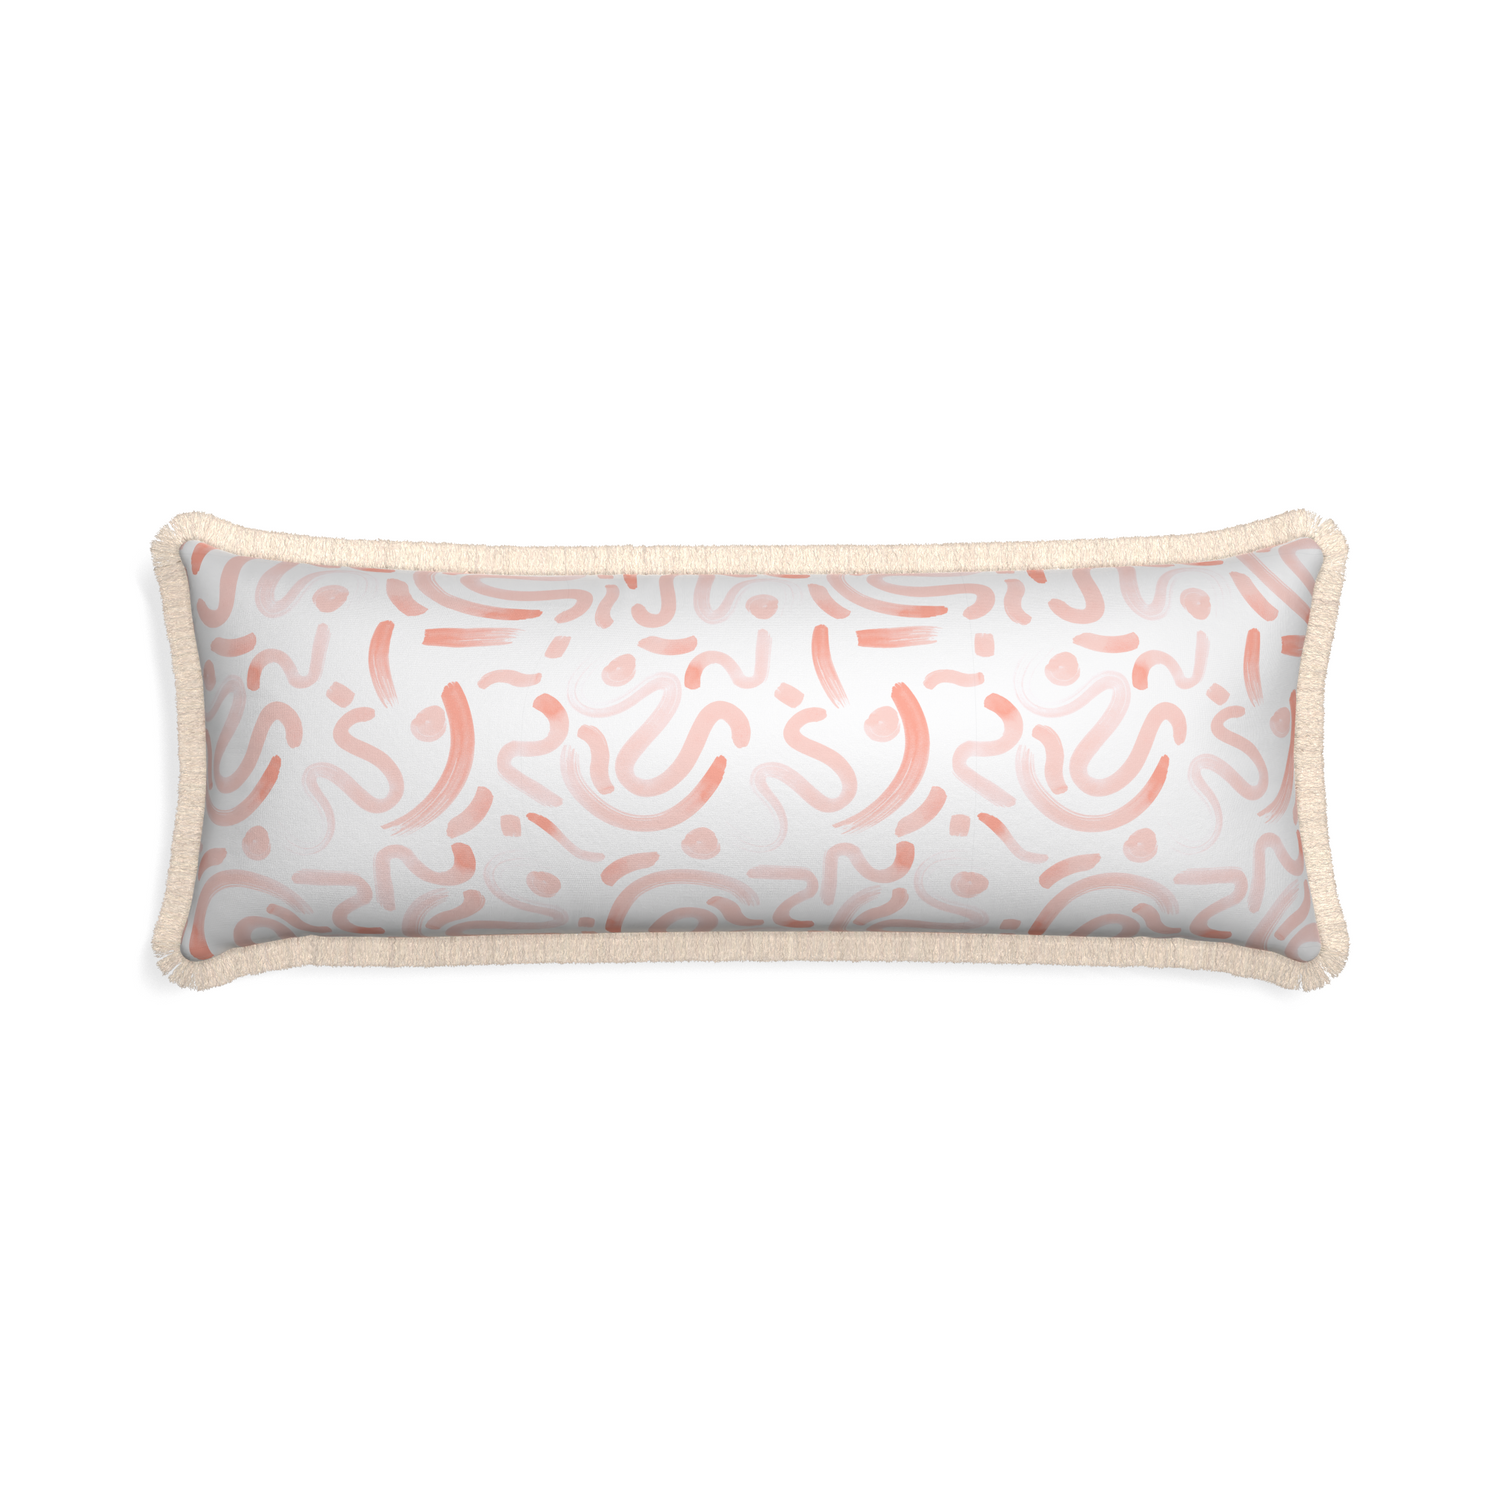 Xl-lumbar hockney pink custom pink graphicpillow with cream fringe on white background